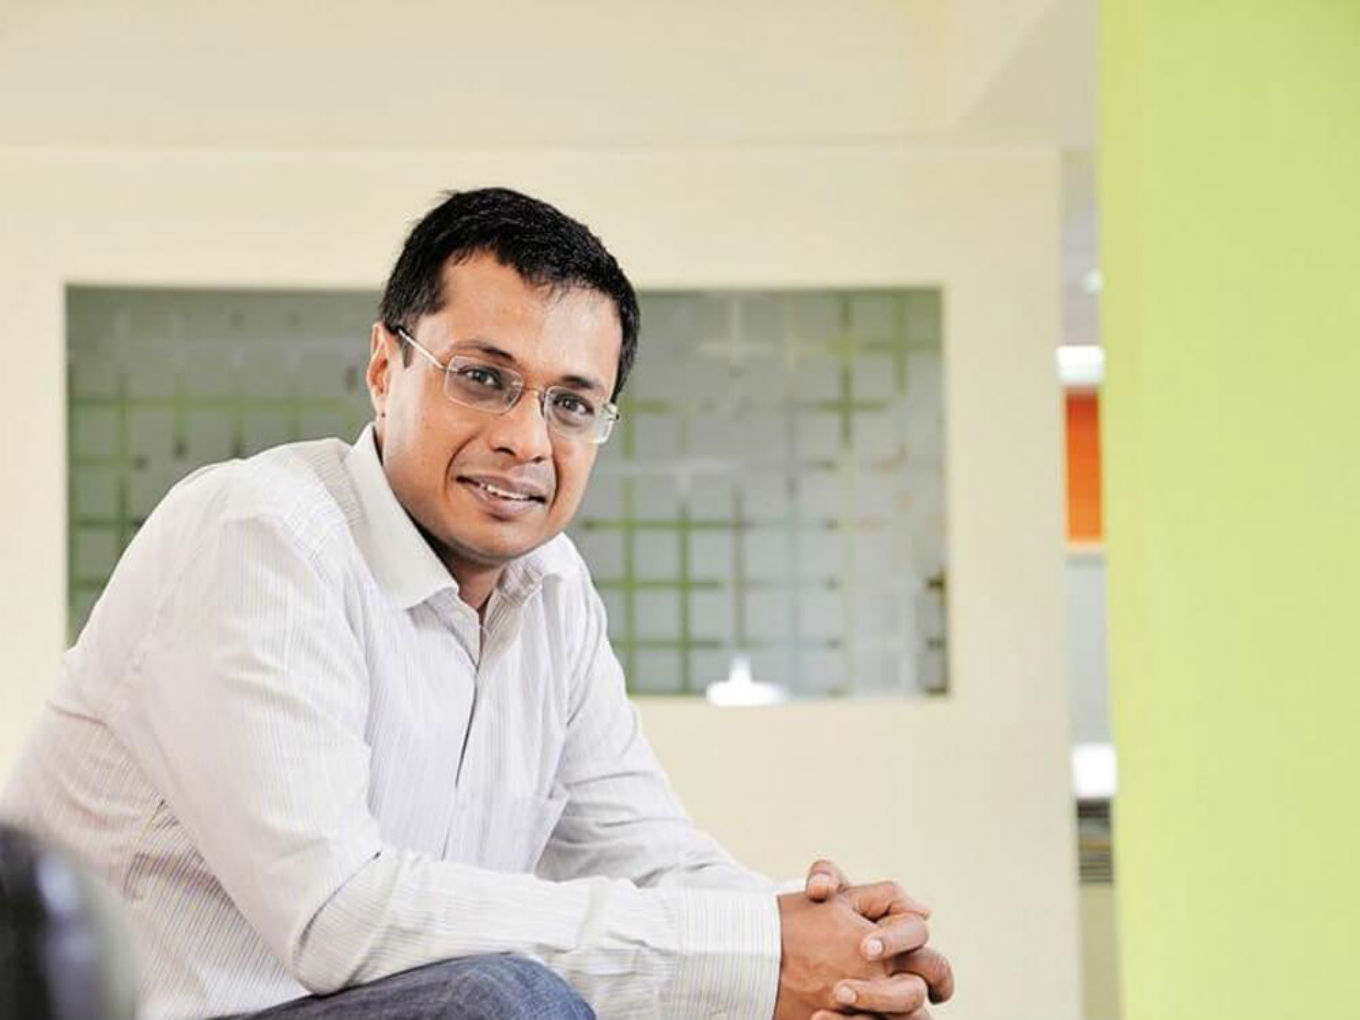 From Etail To AI: Sachin Bansal In Talks To Raise $700 Mn - $1 Bn Startup Fund